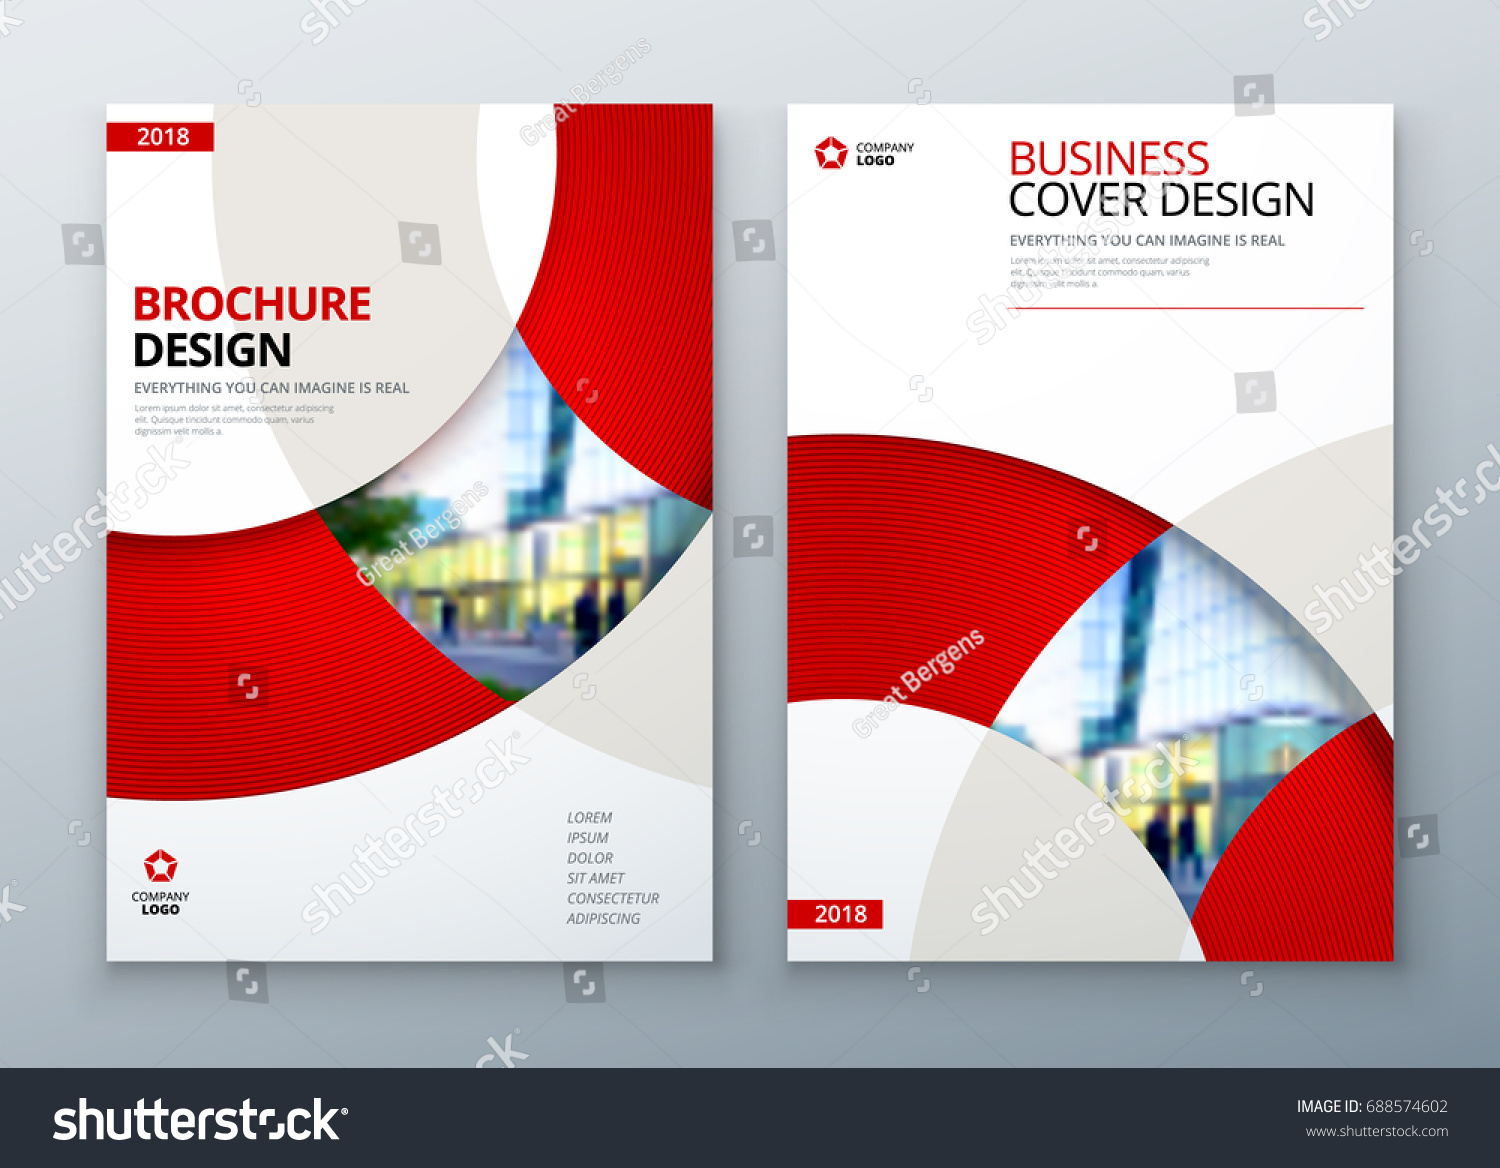 Brochure template layout design. Corporate business annual report, catalog, magazine, flyer mockup. Creative modern bright concept circle round shape #688574602